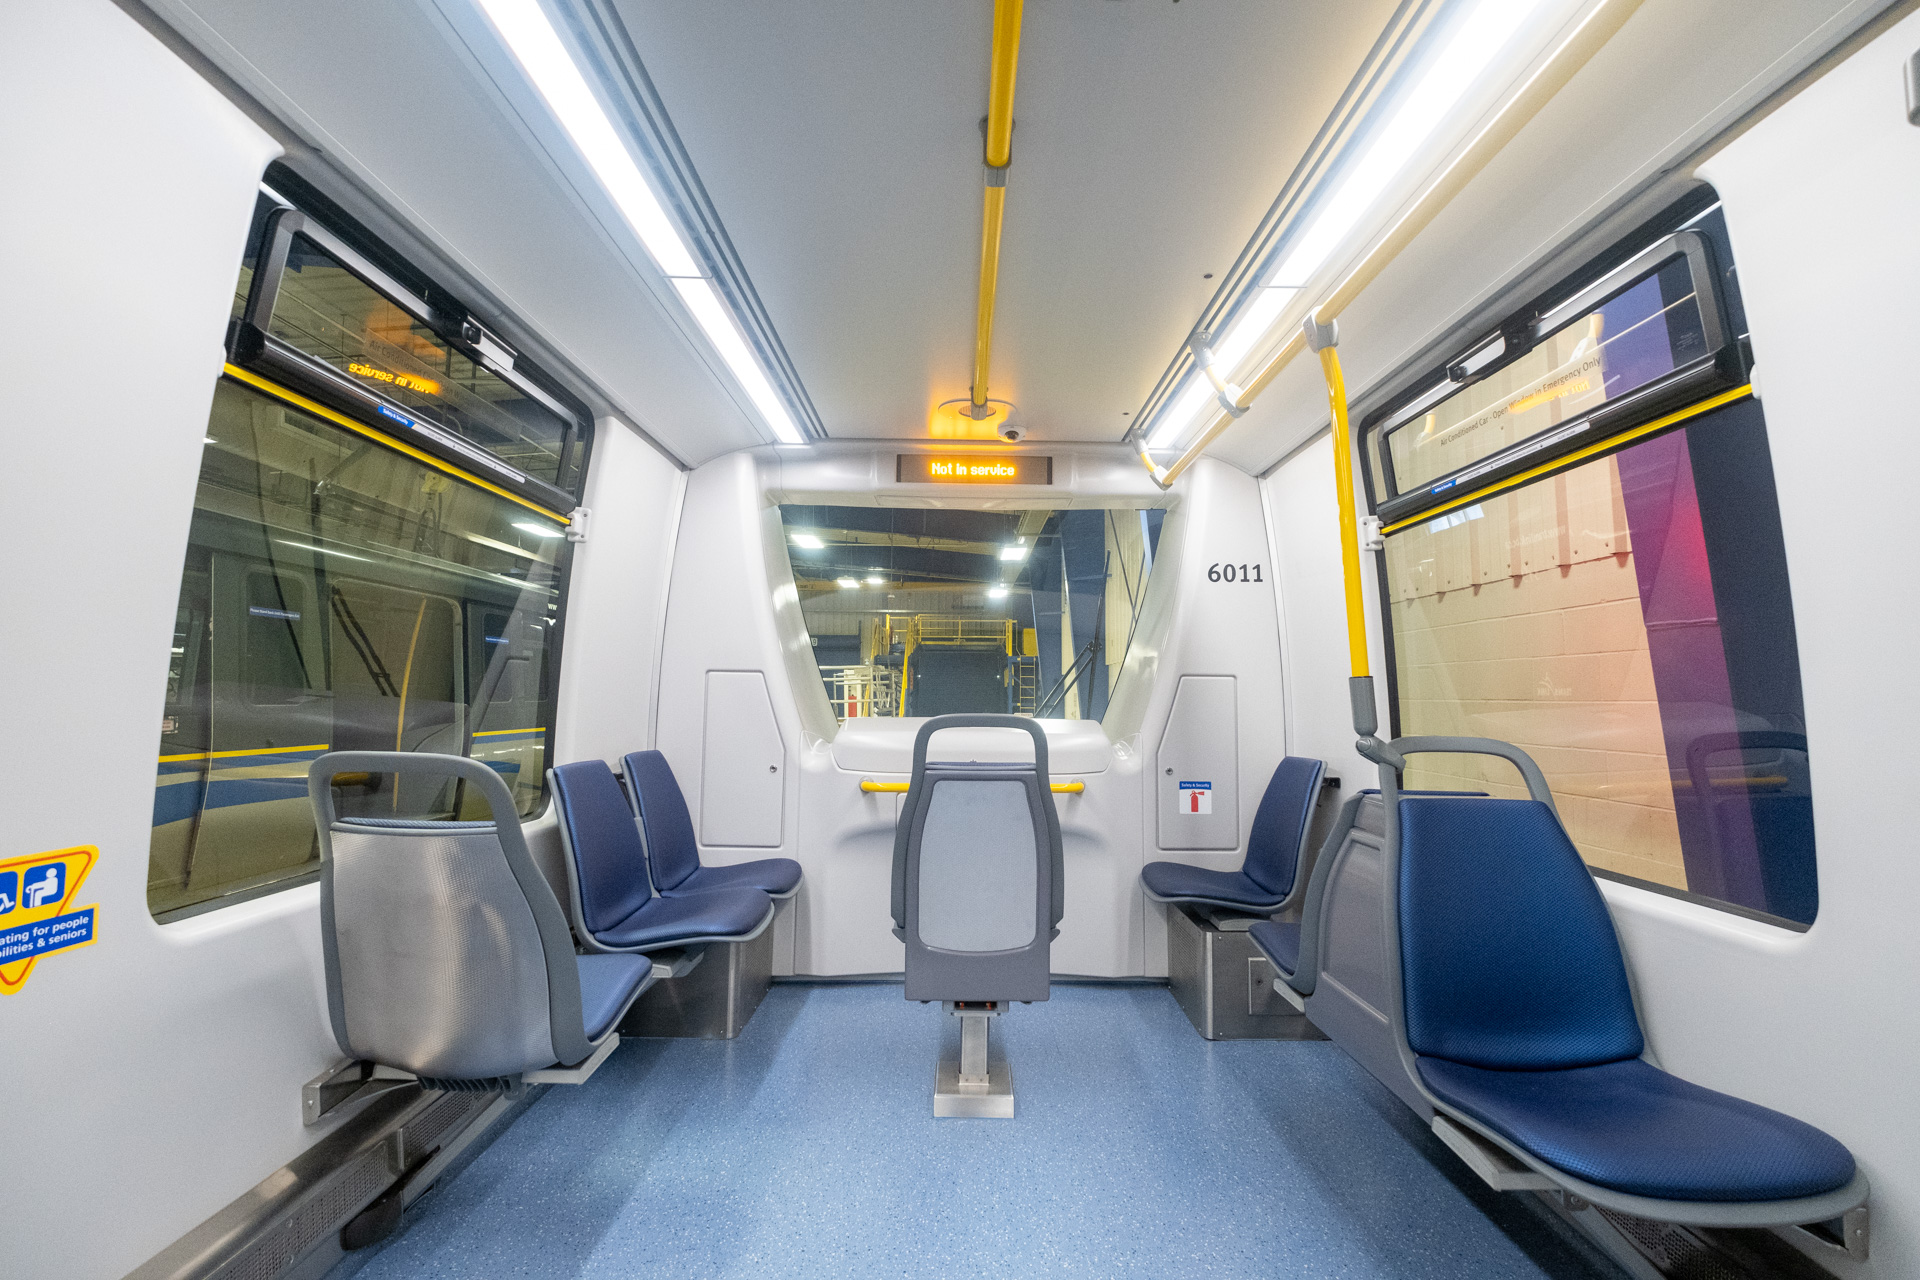 The seating located at the front of the Mark V SkyTrain